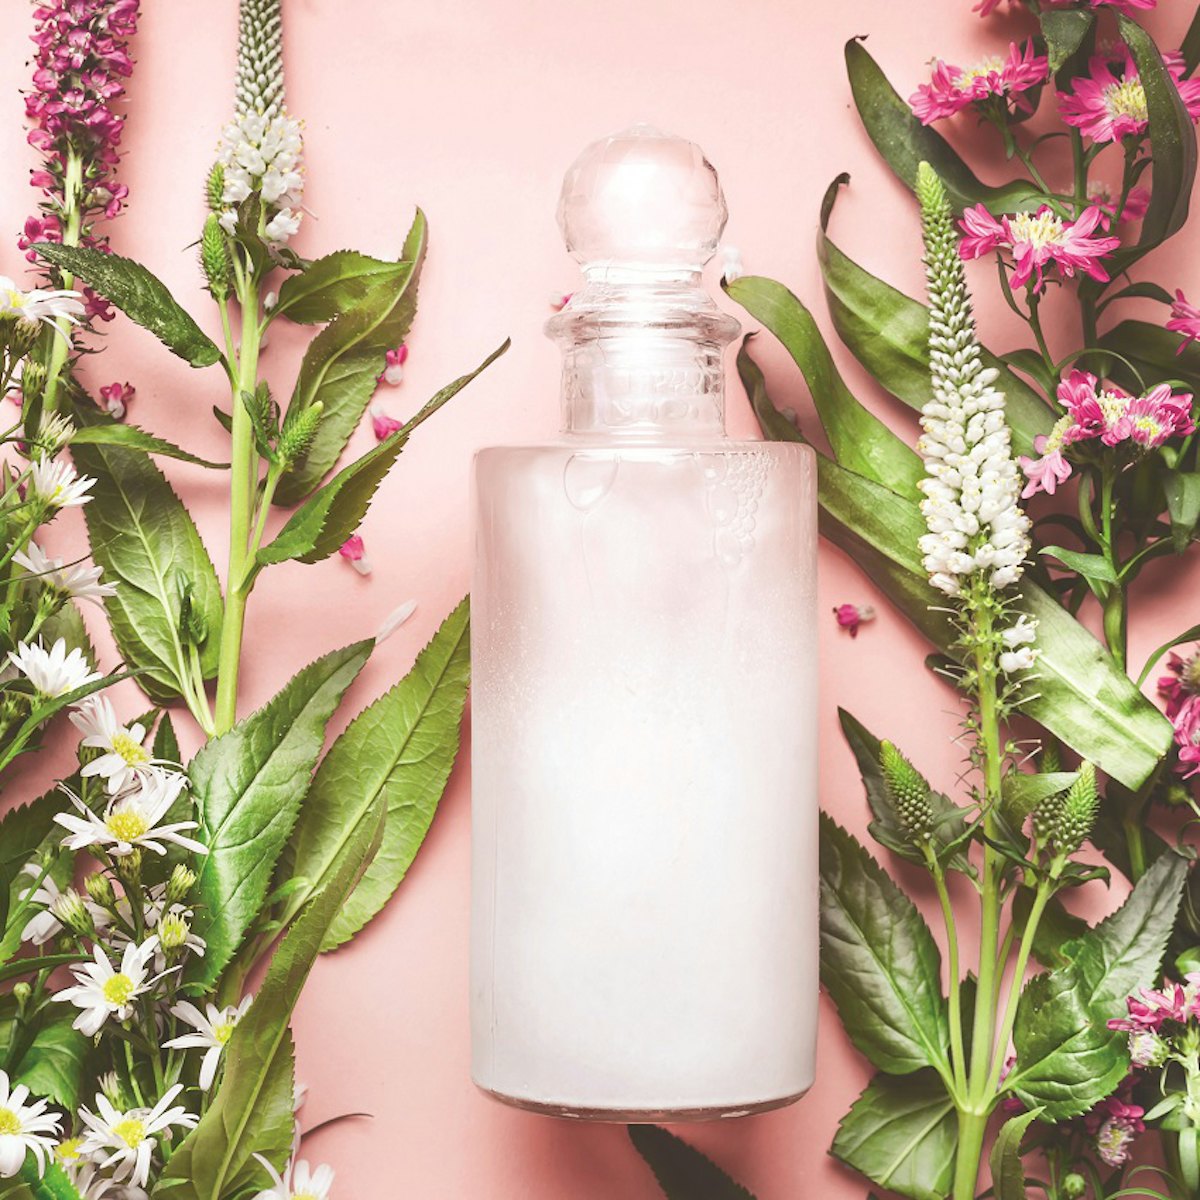 How to Select High Quality Essential Oils - Willow and Sage Magazine